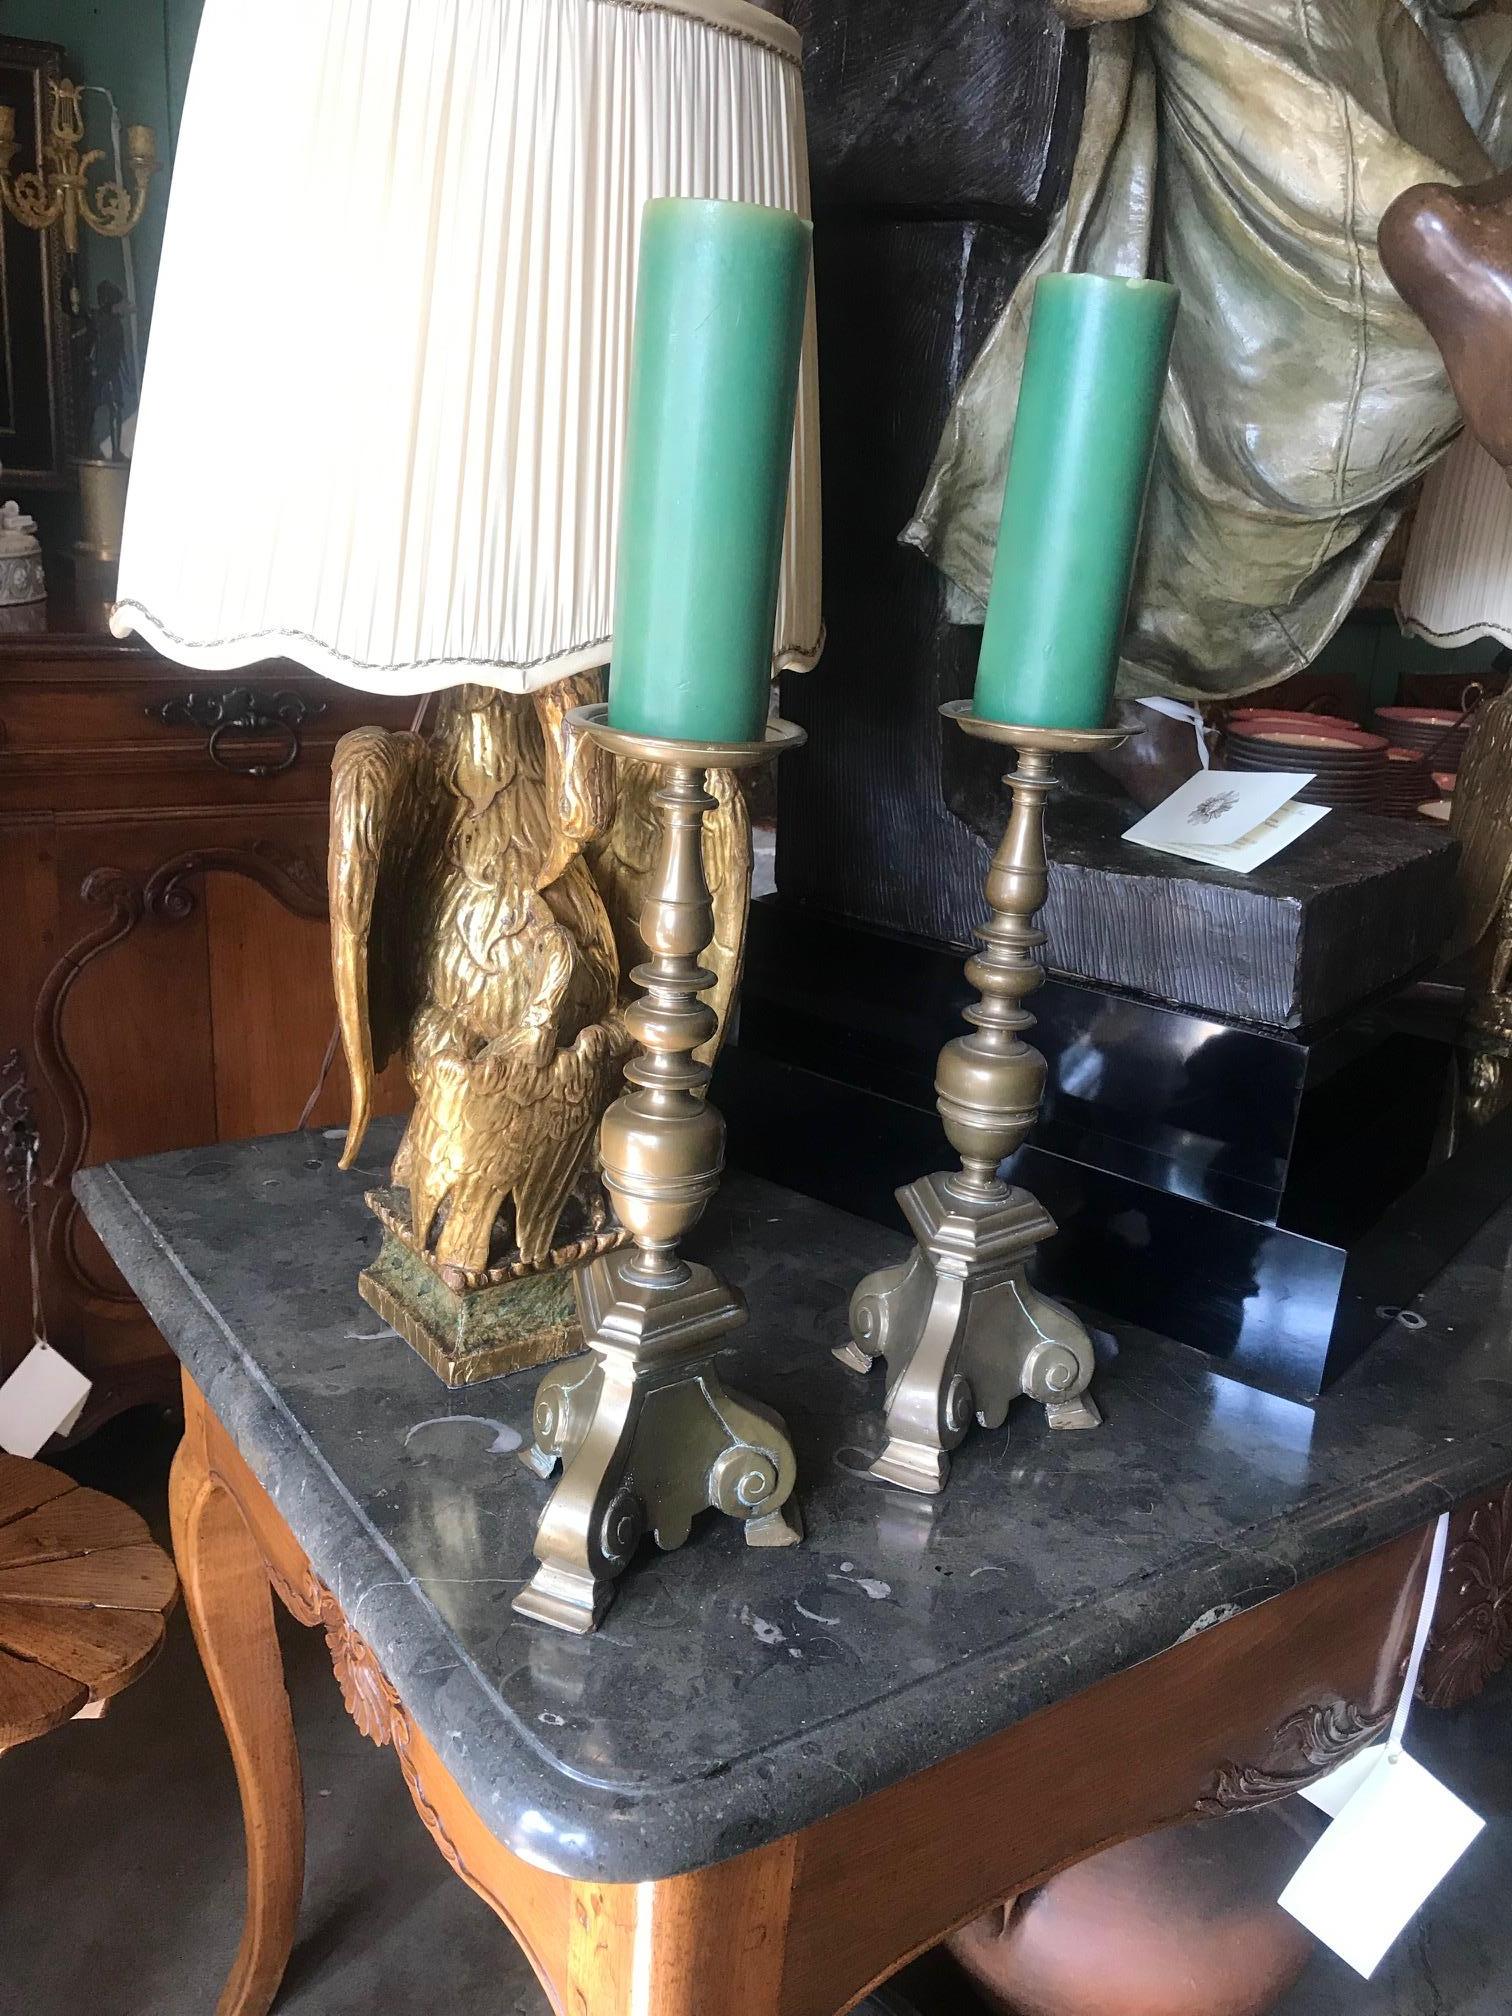 A very beautiful simple pair of 17th-18th century Baroque continental candleholders candlesticks in brass. The mirroring Work with the multiple layers and lines from the bobeches down to the elegant triangle geometric base. We have seen many that